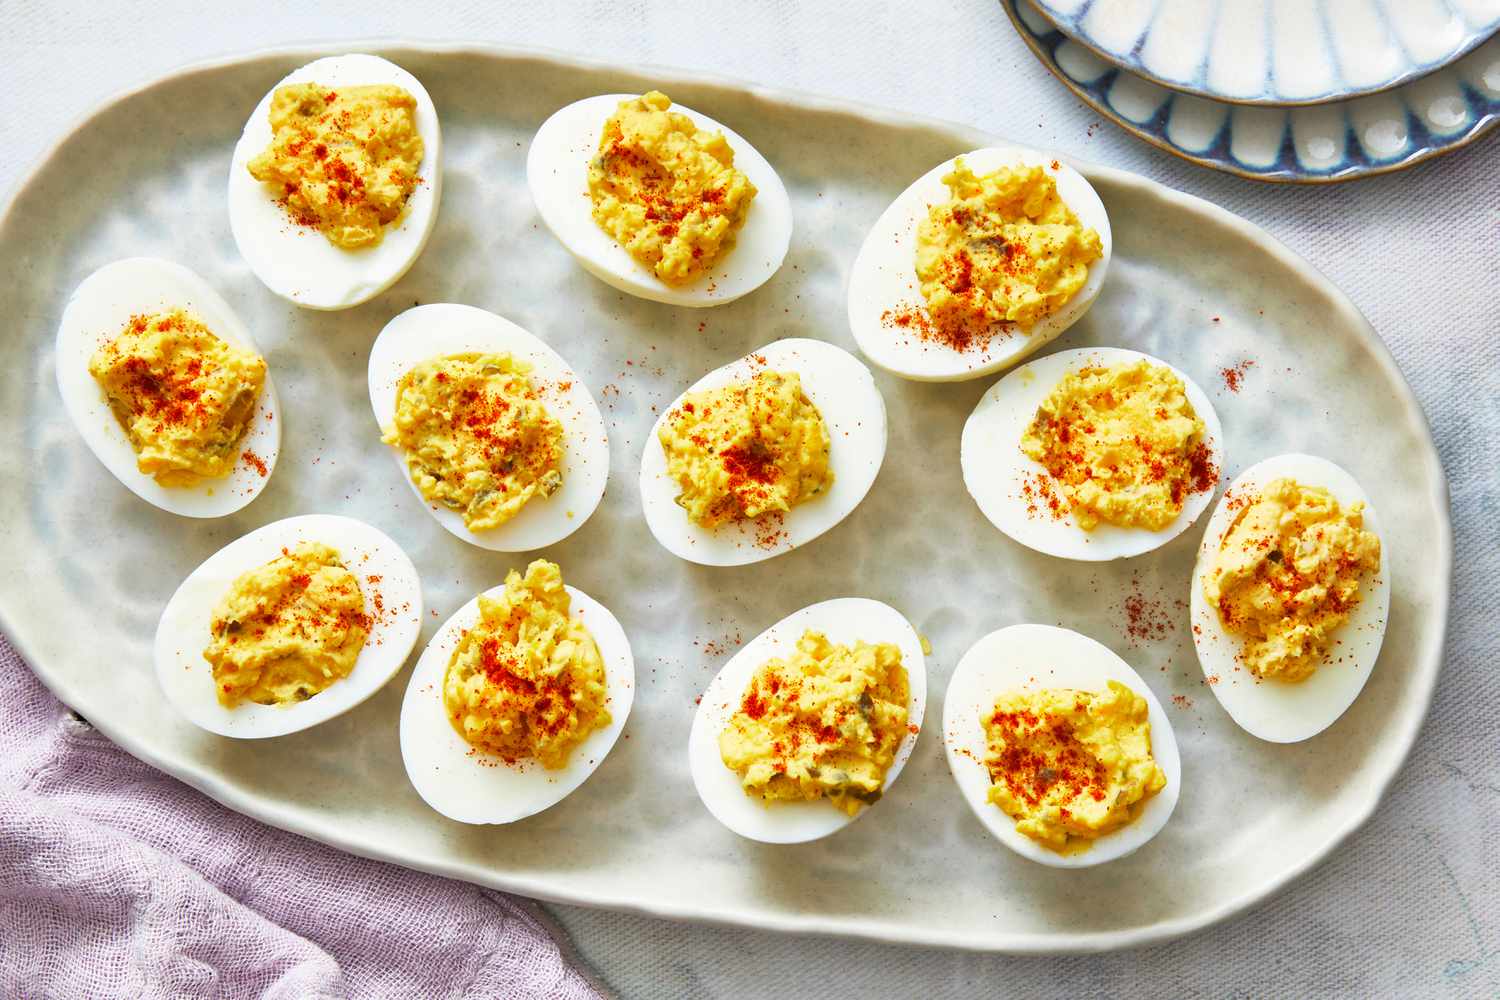 Deviled_Eggs_013_preview_scale_100_ppi_150_quality_100-272aad60d97447e997cedf84715eadb7.jpg